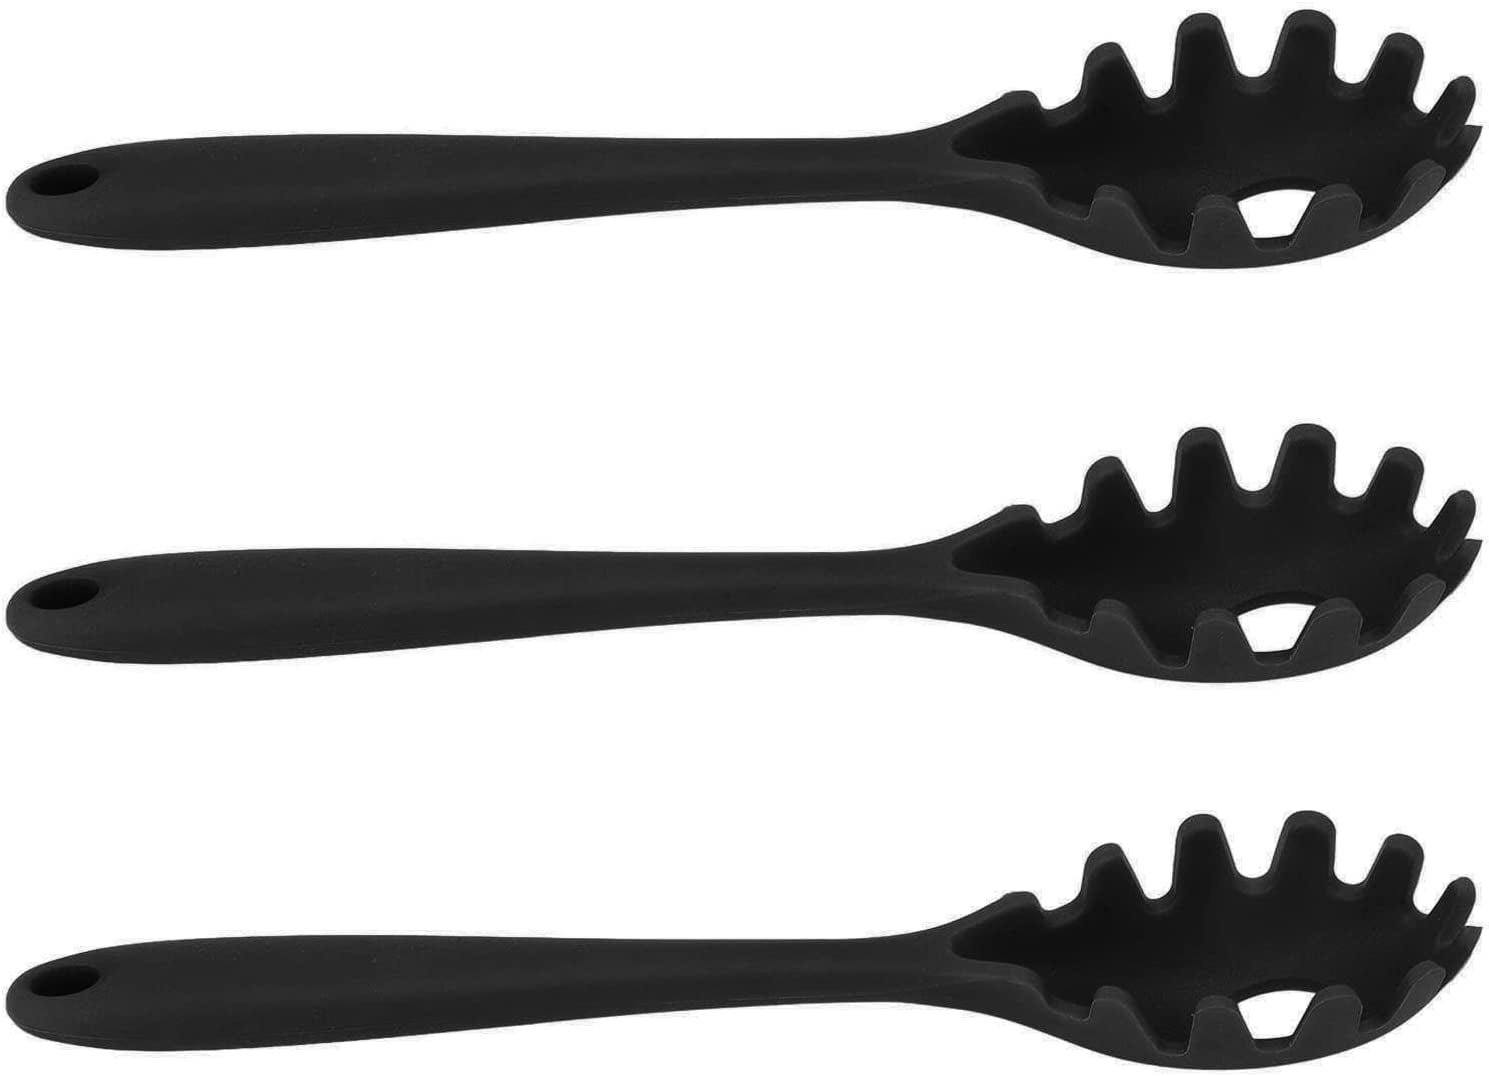 2PC Silicone Pasta Fork, Kitchen Tong, 12.5 Inch Pasta Spoon and